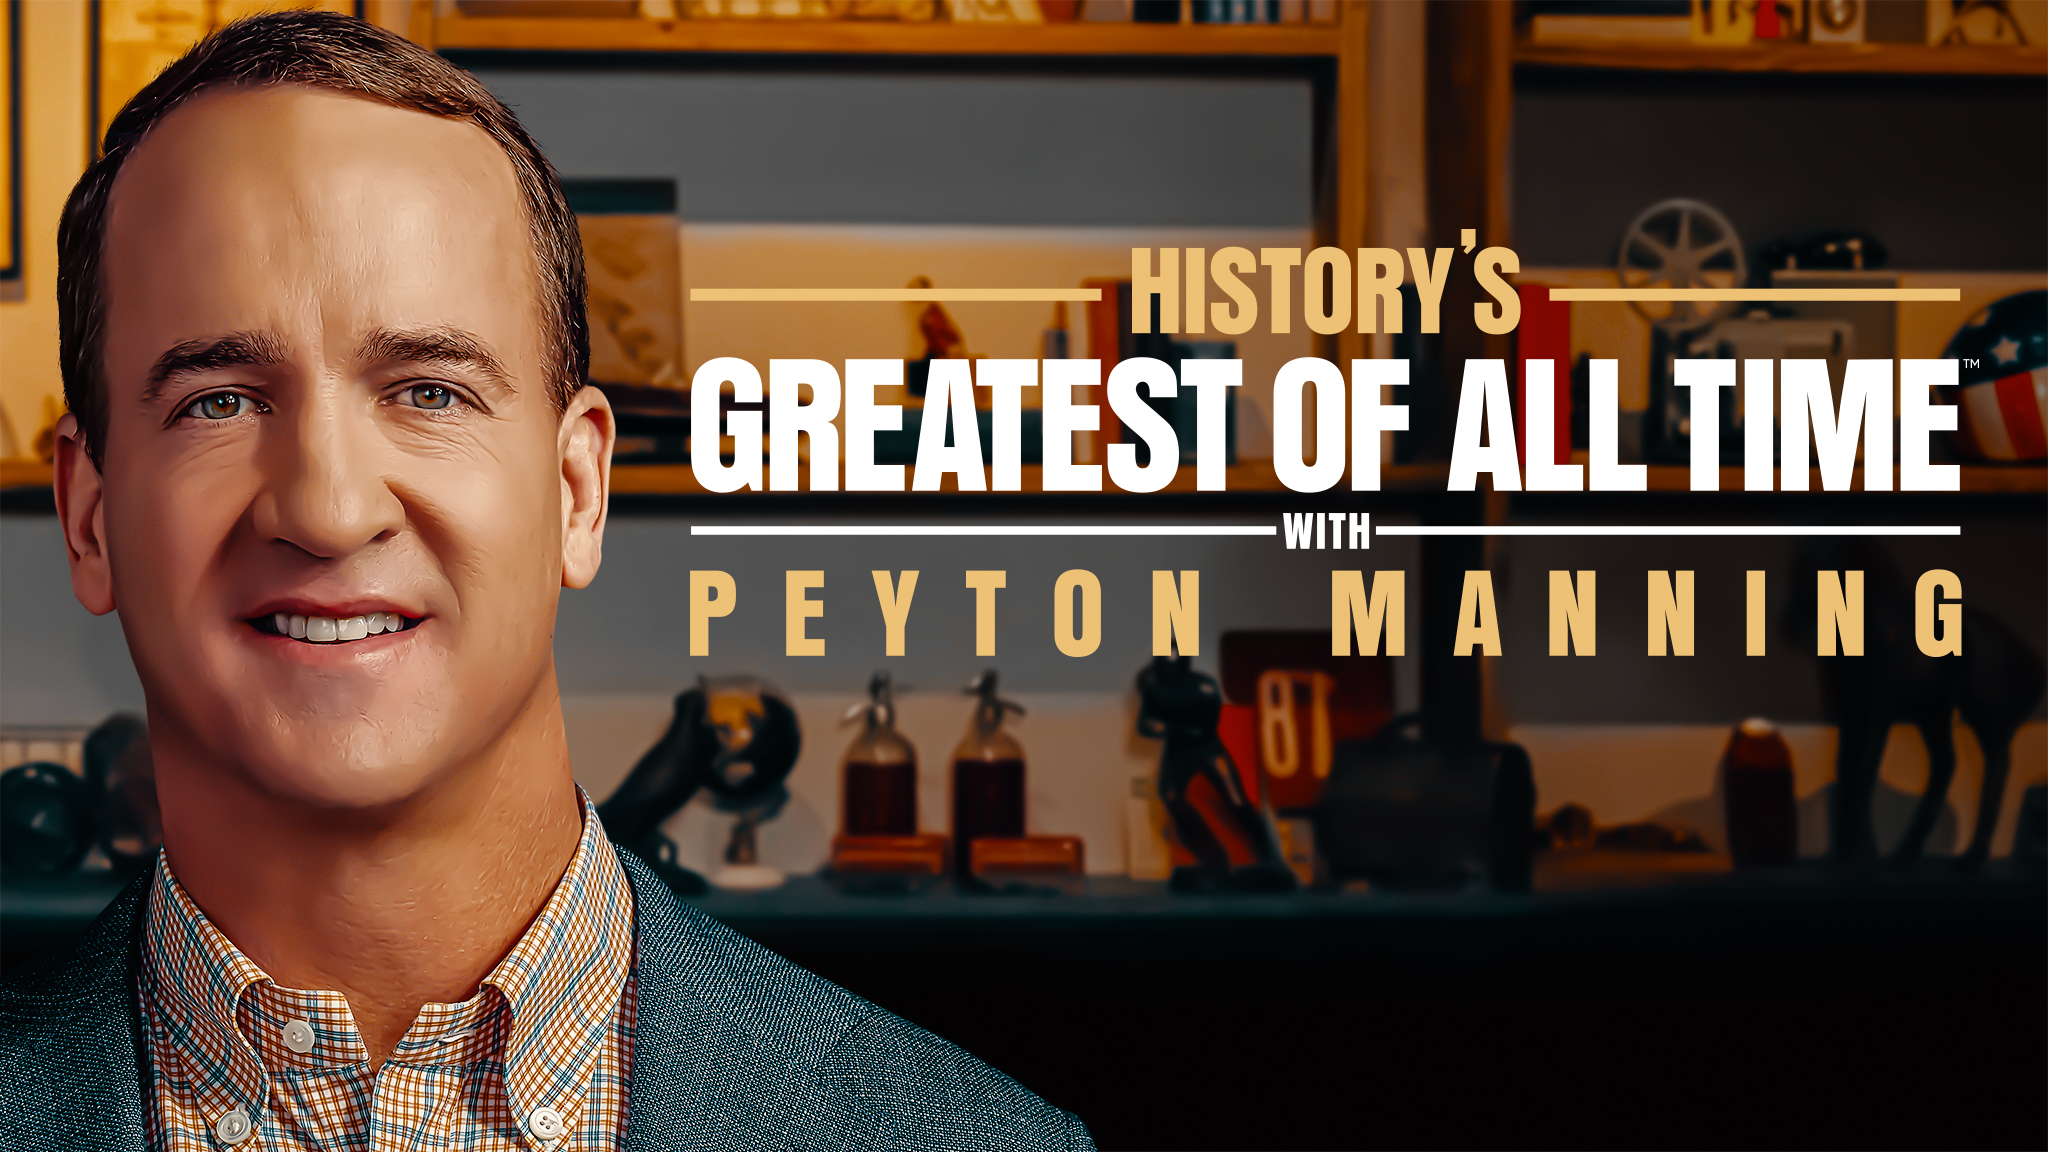 Watch 'History's Greatest of All Time With Peyton Manning' in HISTORY Vault	